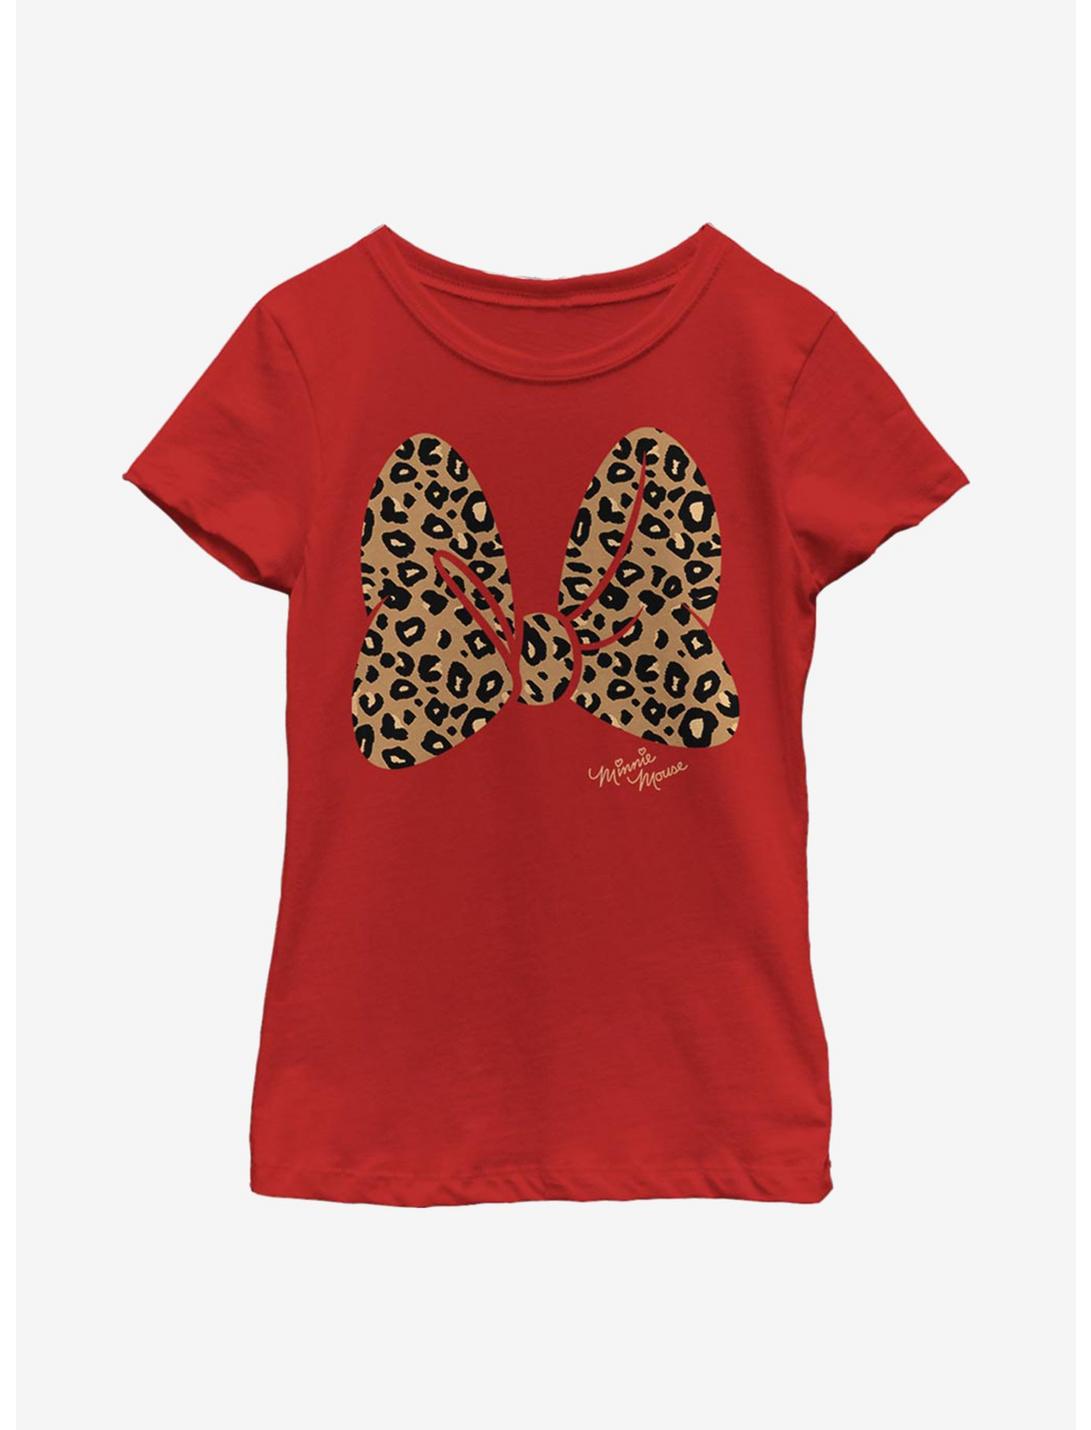 Disney Mickey Mouse Animal Print Bow Youth Girls T-Shirt, RED, hi-res